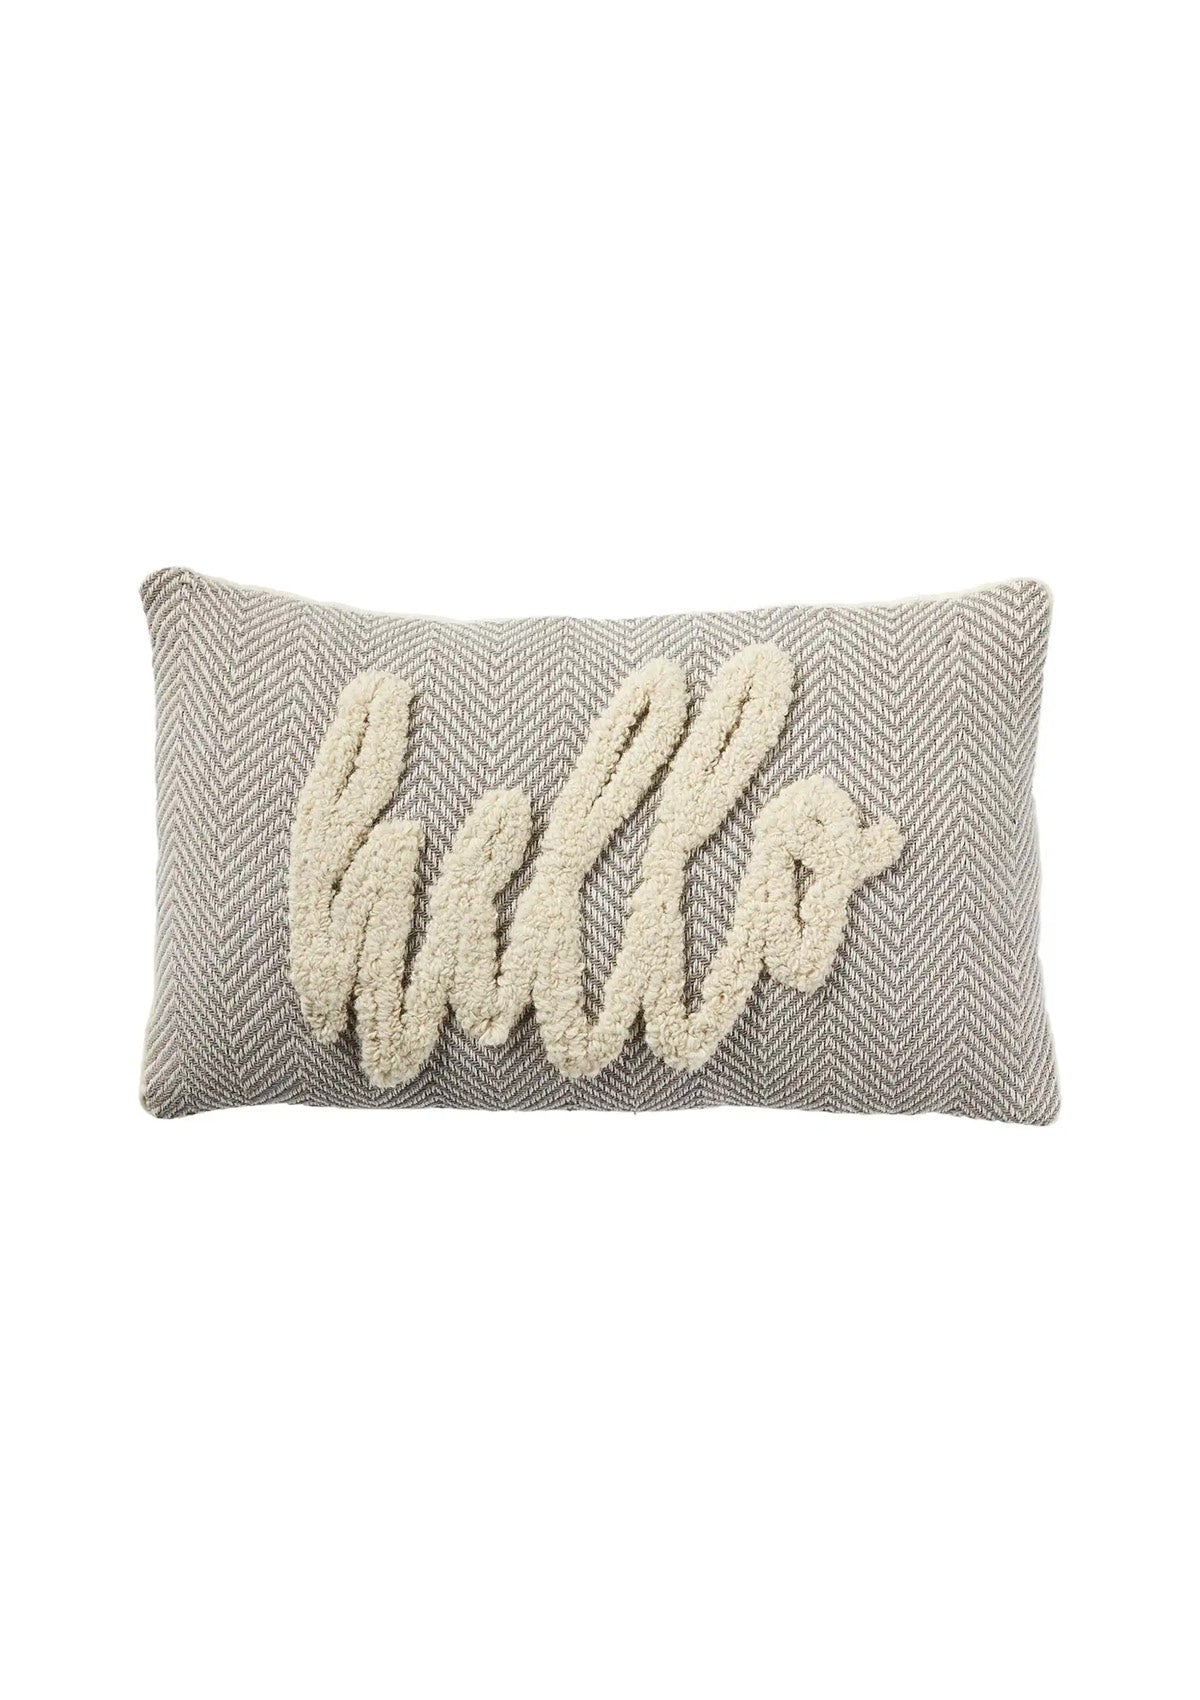 decor-For the Home-Pillows-Ruby Jane.